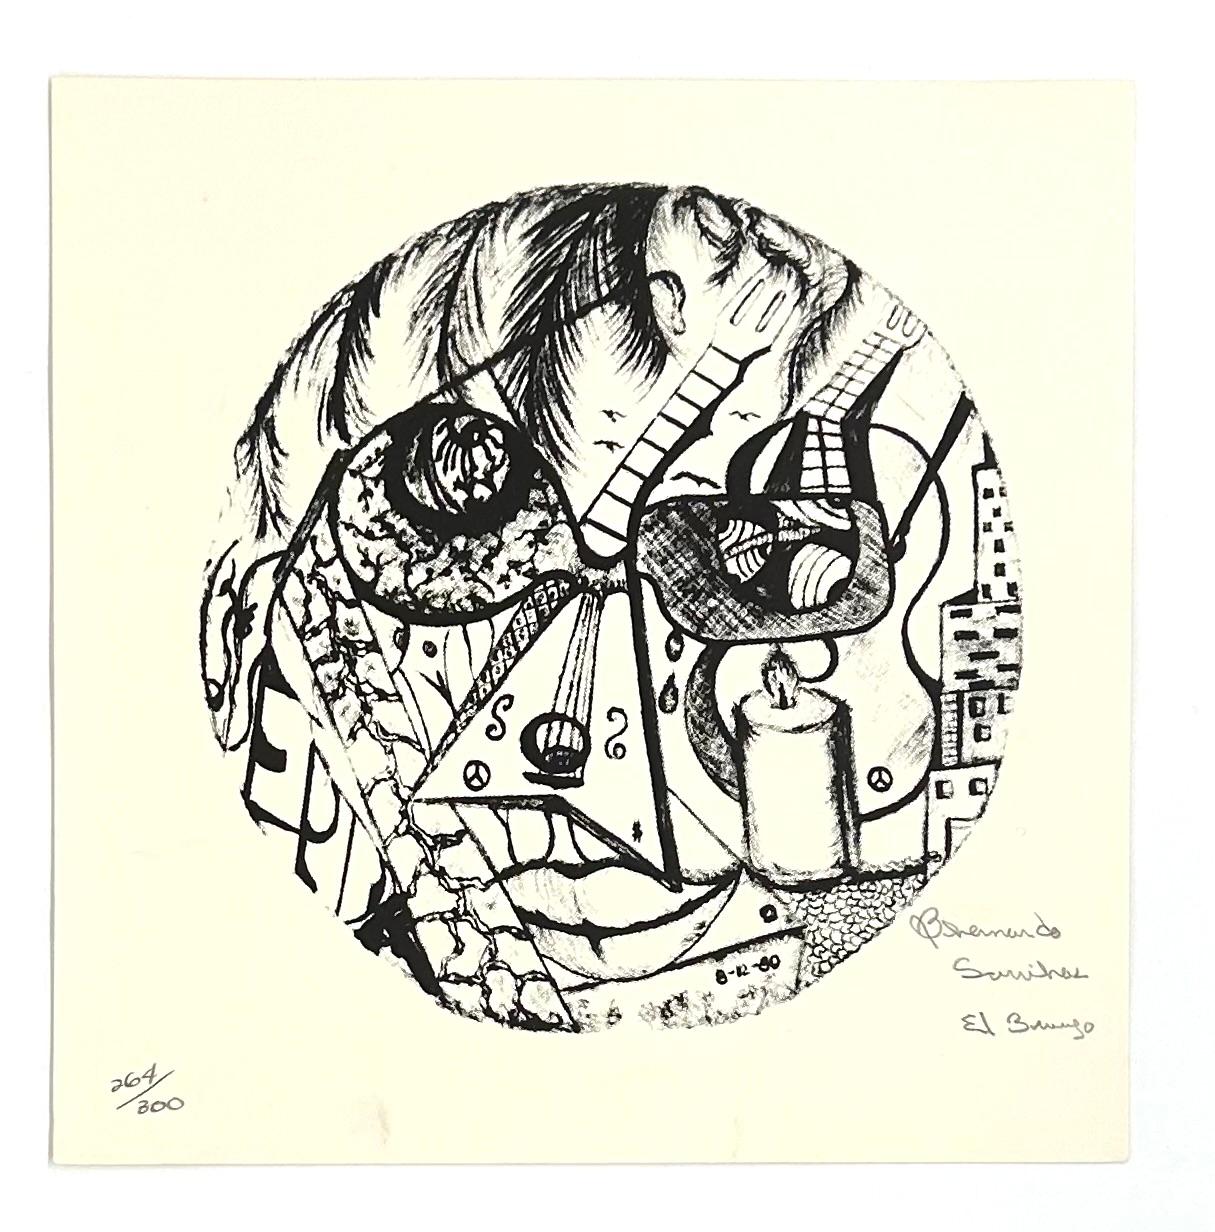 Bernardo Sarrias (Cuba, 1950)
'Untitled (La Huella Múltiple)', 2002
engraving on paper
8.1 x 8.1 in. (20.5 x 20.5 cm.)
Edition of 300
ID: HUE-255
Hand-signed by author